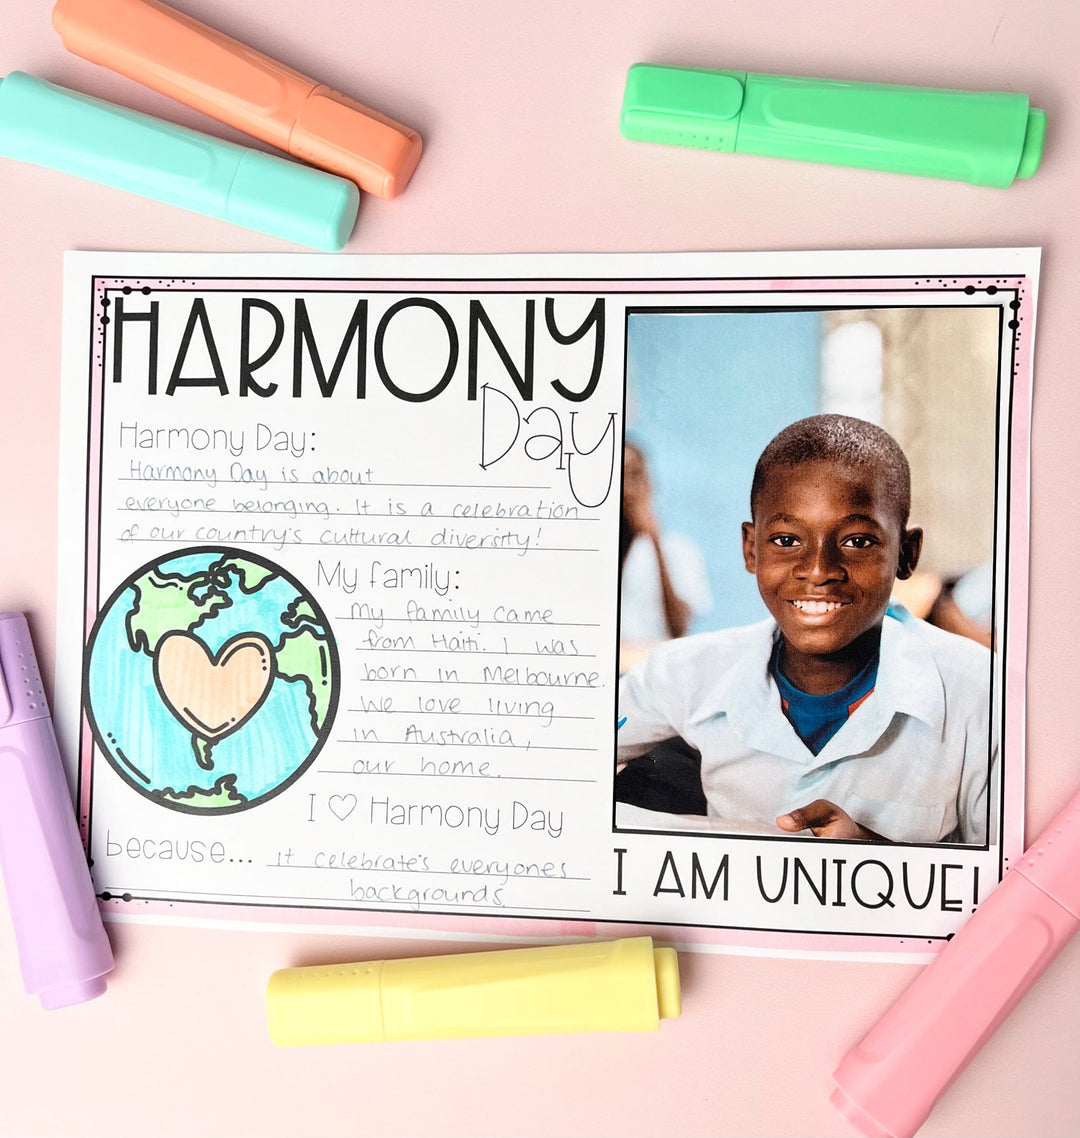 3 Harmony Day Resources for Teachers